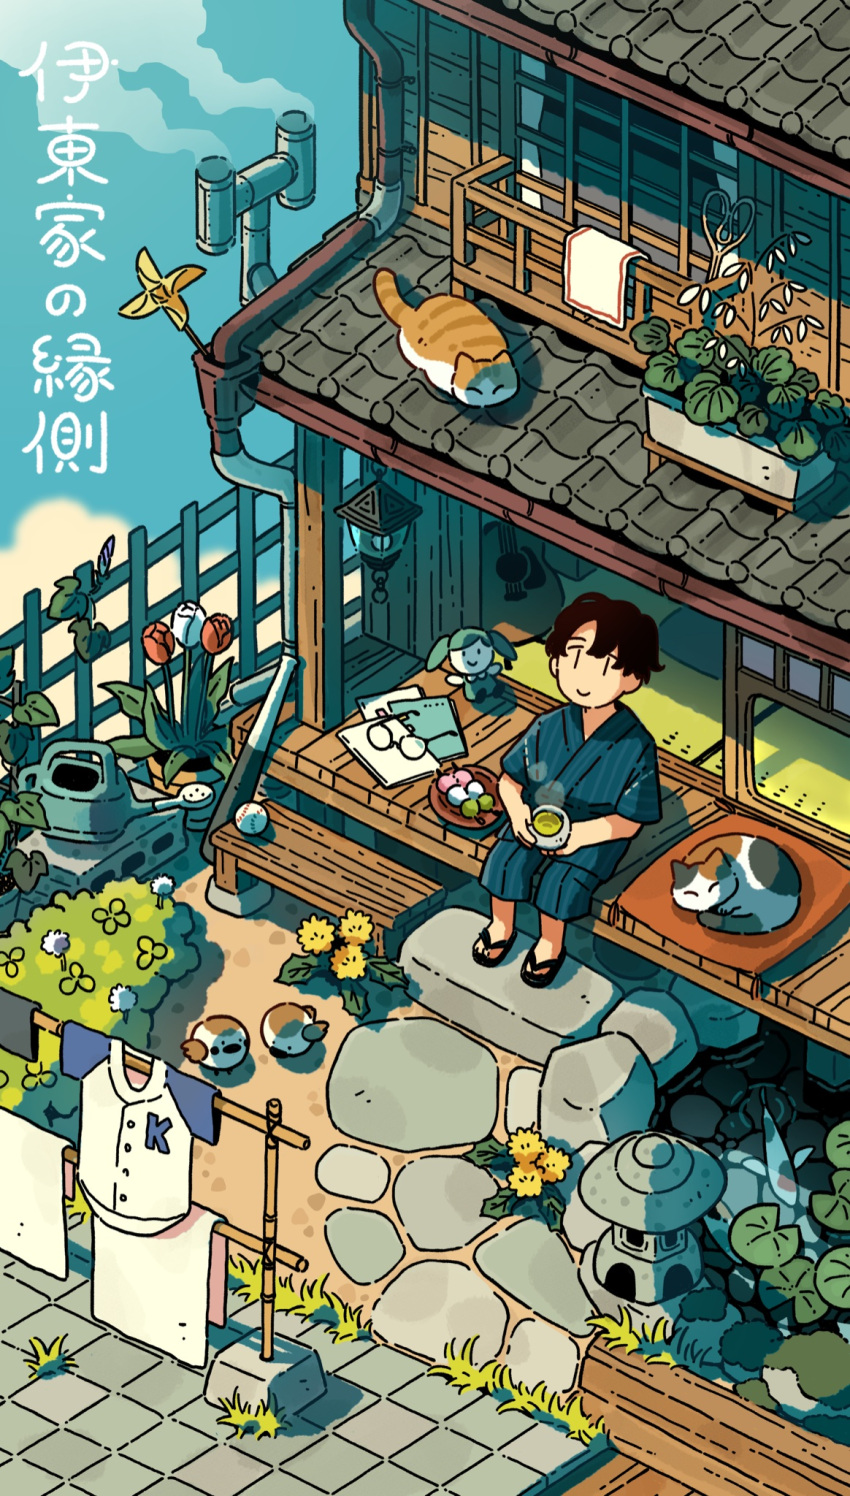 1boy animal ball baseball_bat bird black_hair brown_cat bush calico canalbooks1125 cat chimney cinder_block closed_mouth commentary_request cup cushion dango day doll drainpipe fence flower food from_above glasses green_tea guitar highres holding holding_cup instrument itou_kent koi laundry laundry_pole lily_pad looking_up notebook outdoors pillar pinwheel plant plate pond potted_plant real_life red_flower red_tulip ripples rock rug_beater sanshoku_dango short_hair short_sleeves sitting sleeping_animal smile solo steam stepping_stones stone_lantern tatami tea towel translation_request trellis tulip unworn_eyewear veranda wagashi watering_can white_flower white_tulip wide_shot yellow_flower zabuton zouri |_|